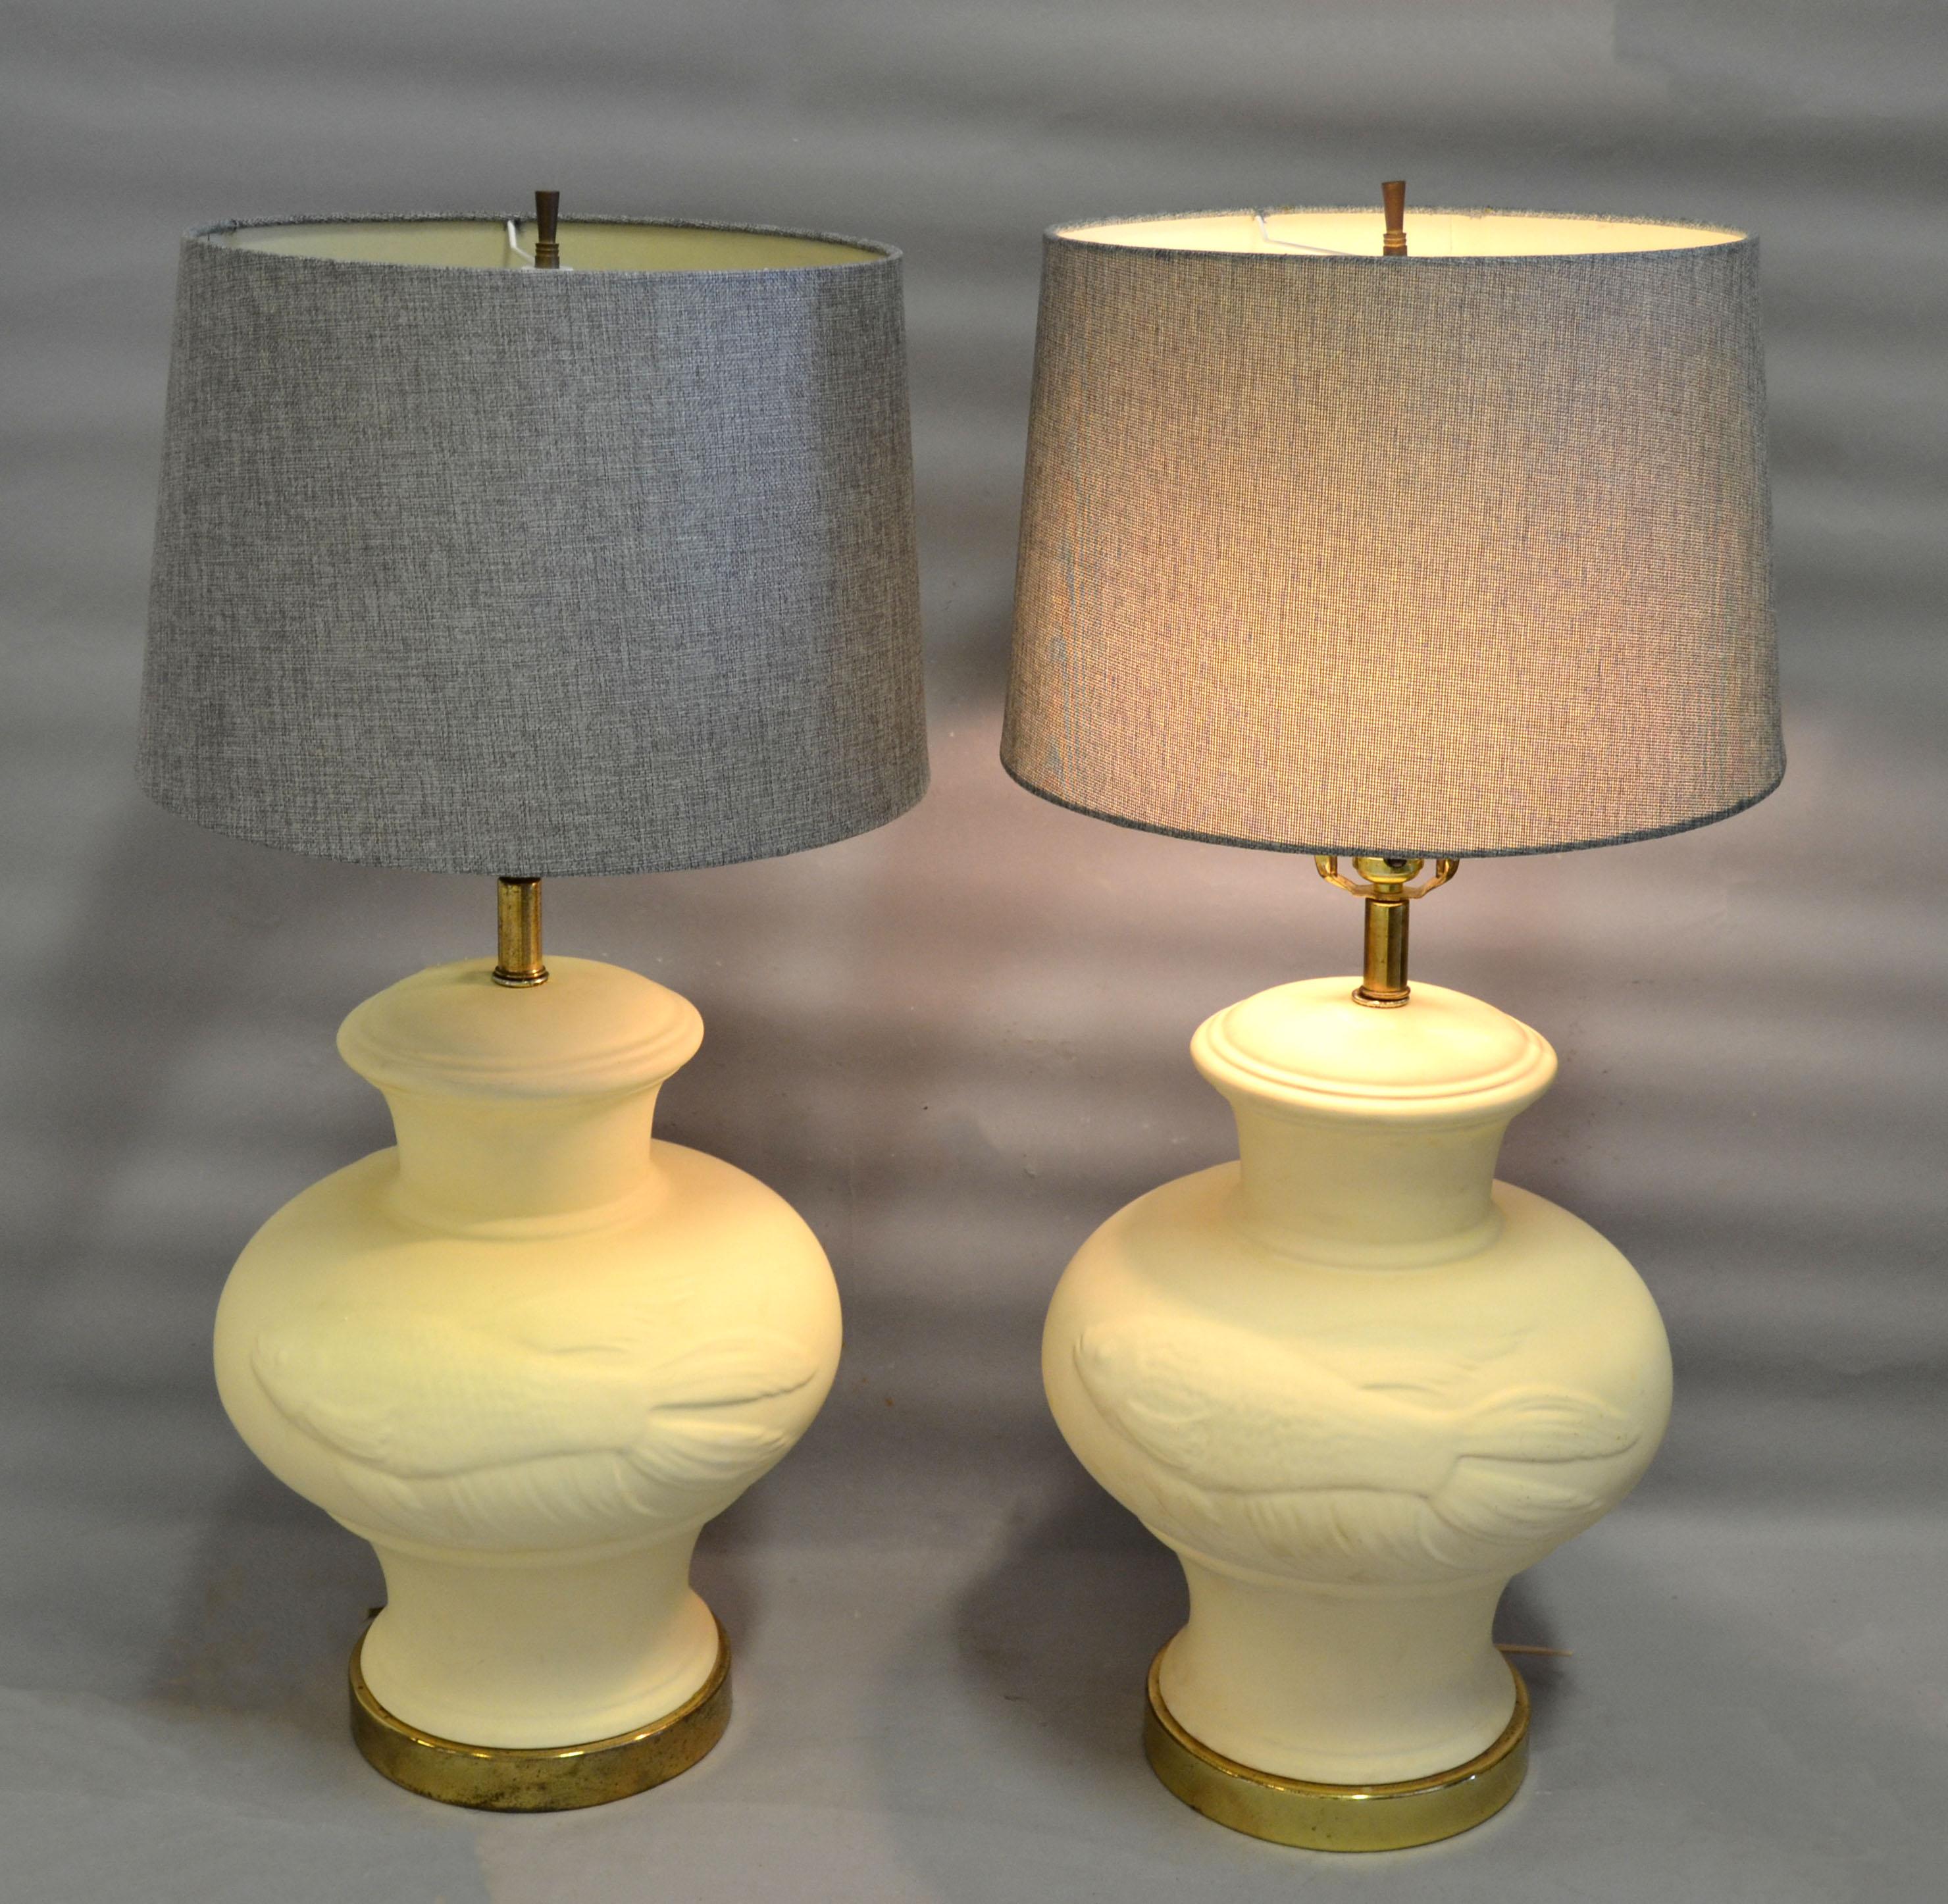 A pair of Asian style beige ceramic table lamps with brass base and Koi Fish Pattern.
Perfect working condition and each Lamp takes a regular or LED bulb.
No Shades.
   